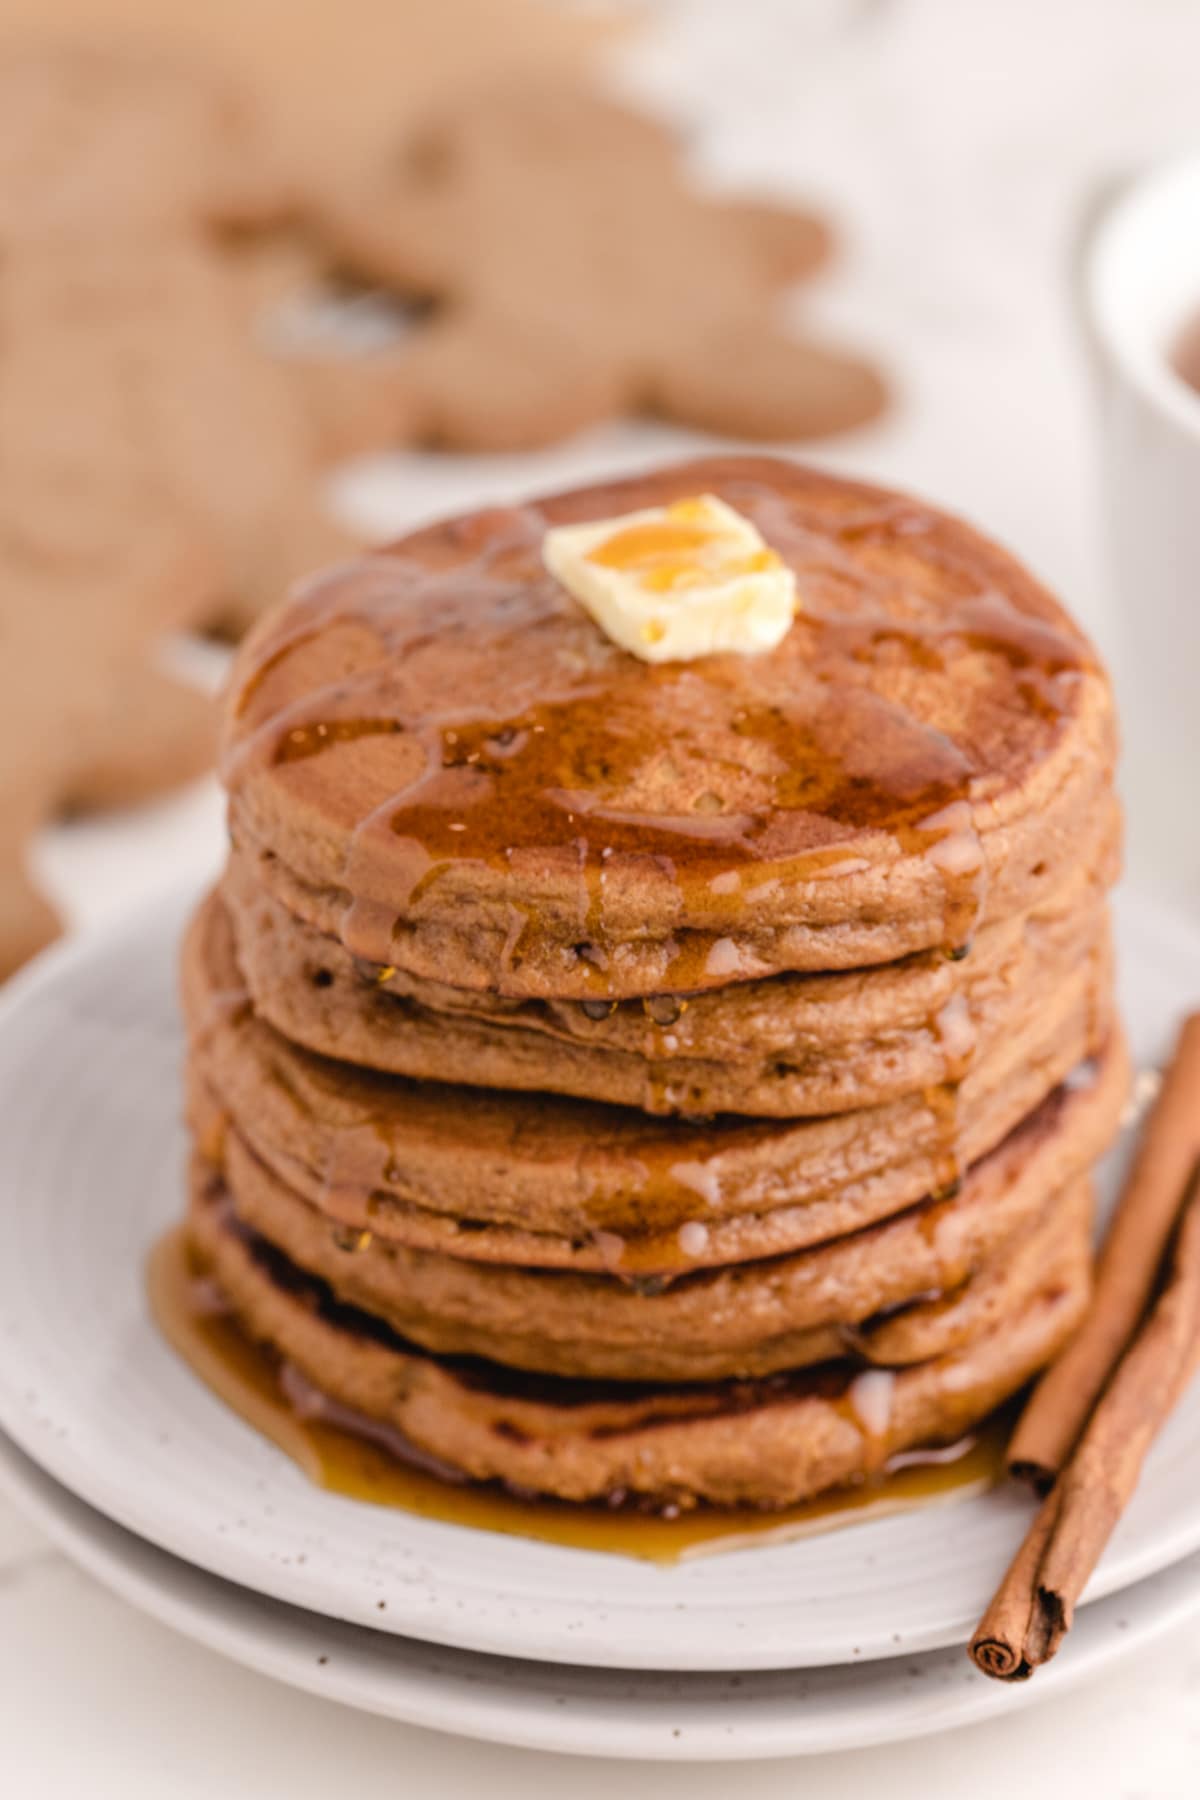 Gingerbread pancakes with butter and syrup